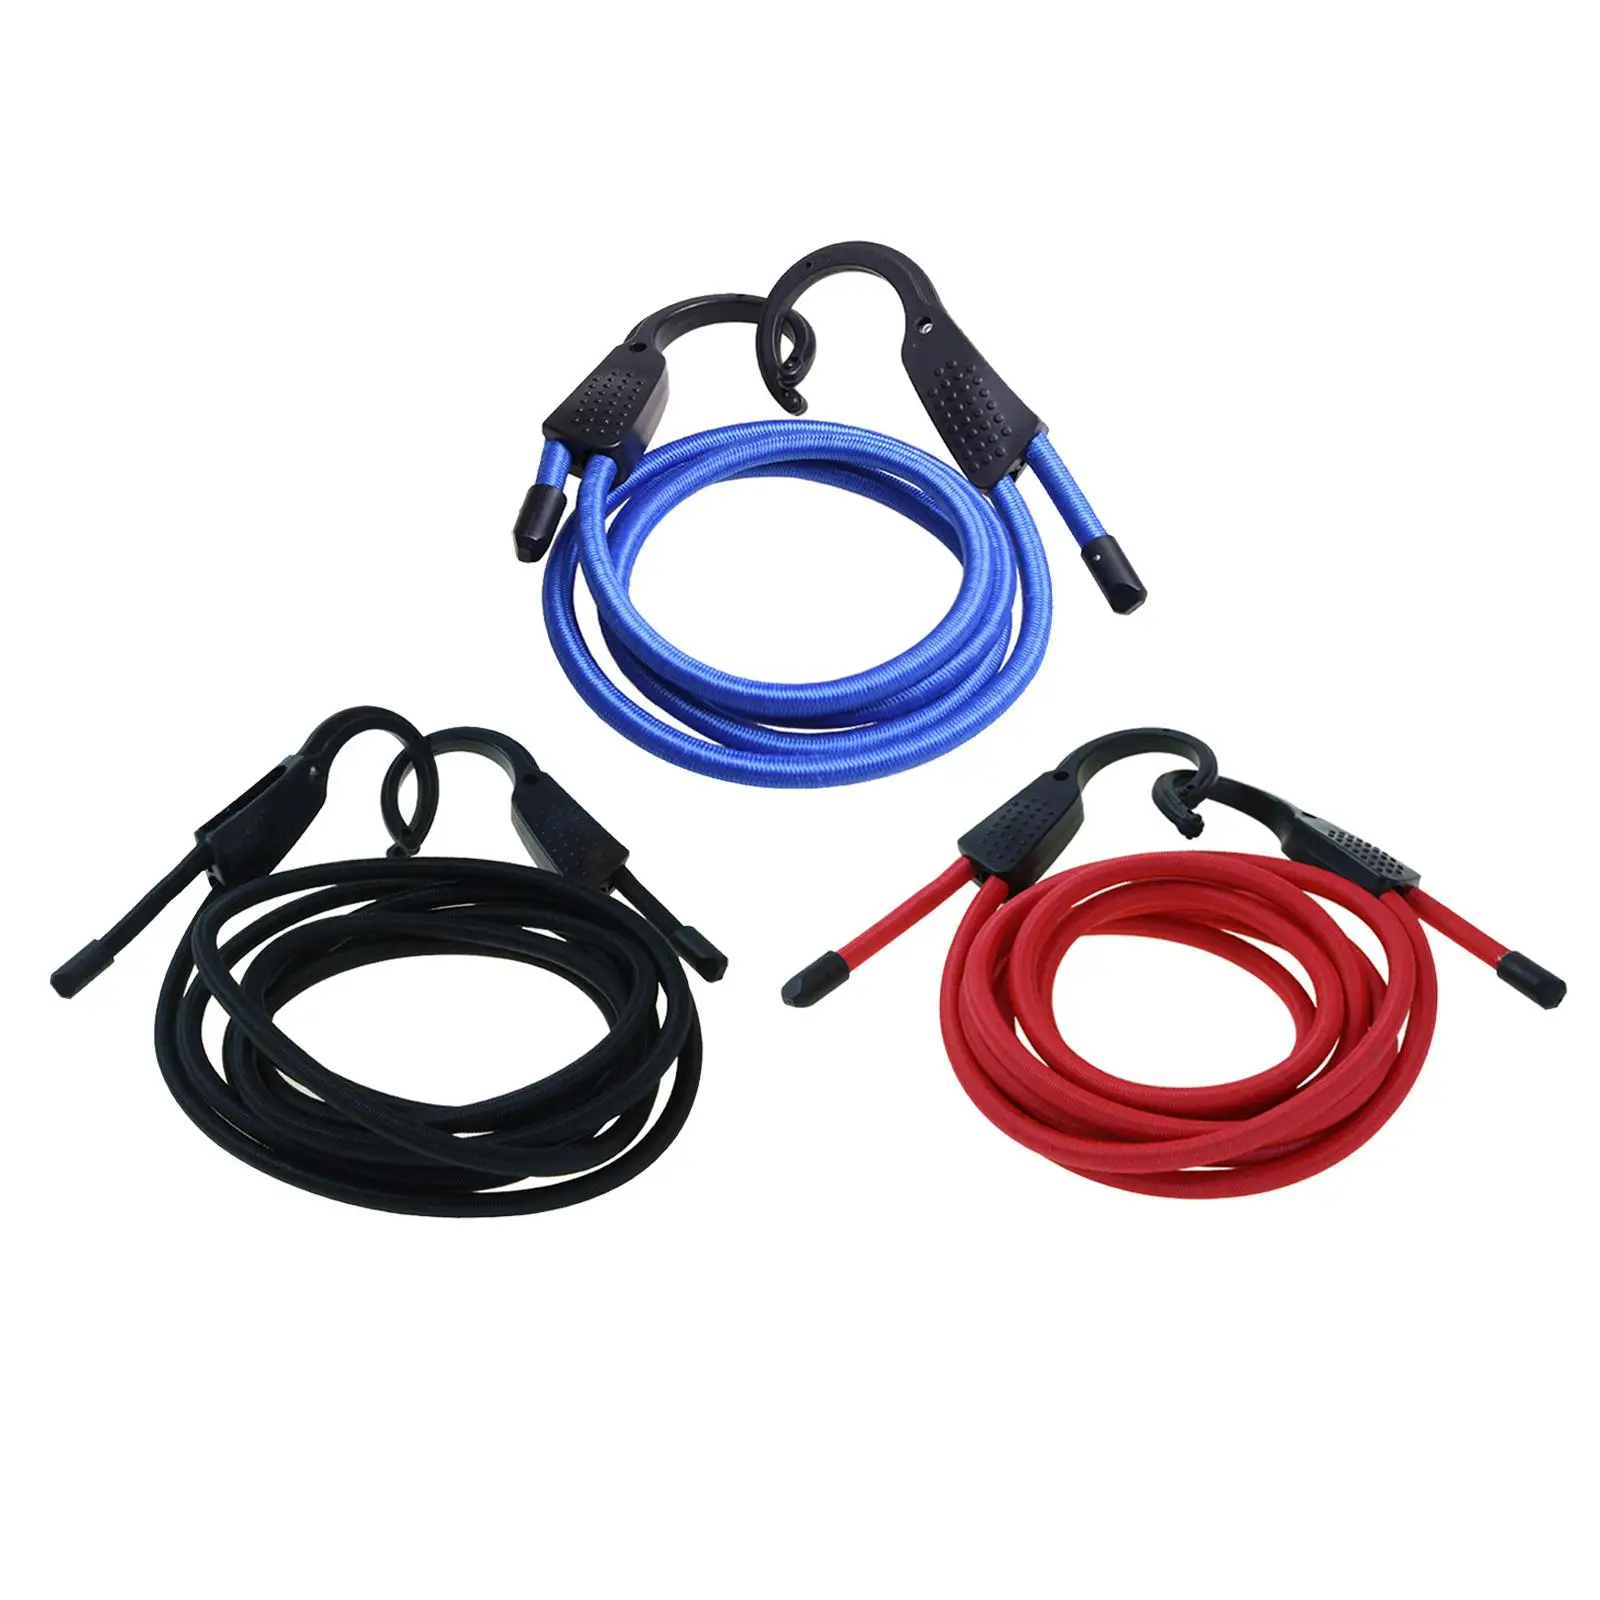 Rubber Elastic Strap Car Clothesline Hook for Luggage Rack Hand Carts Trunk